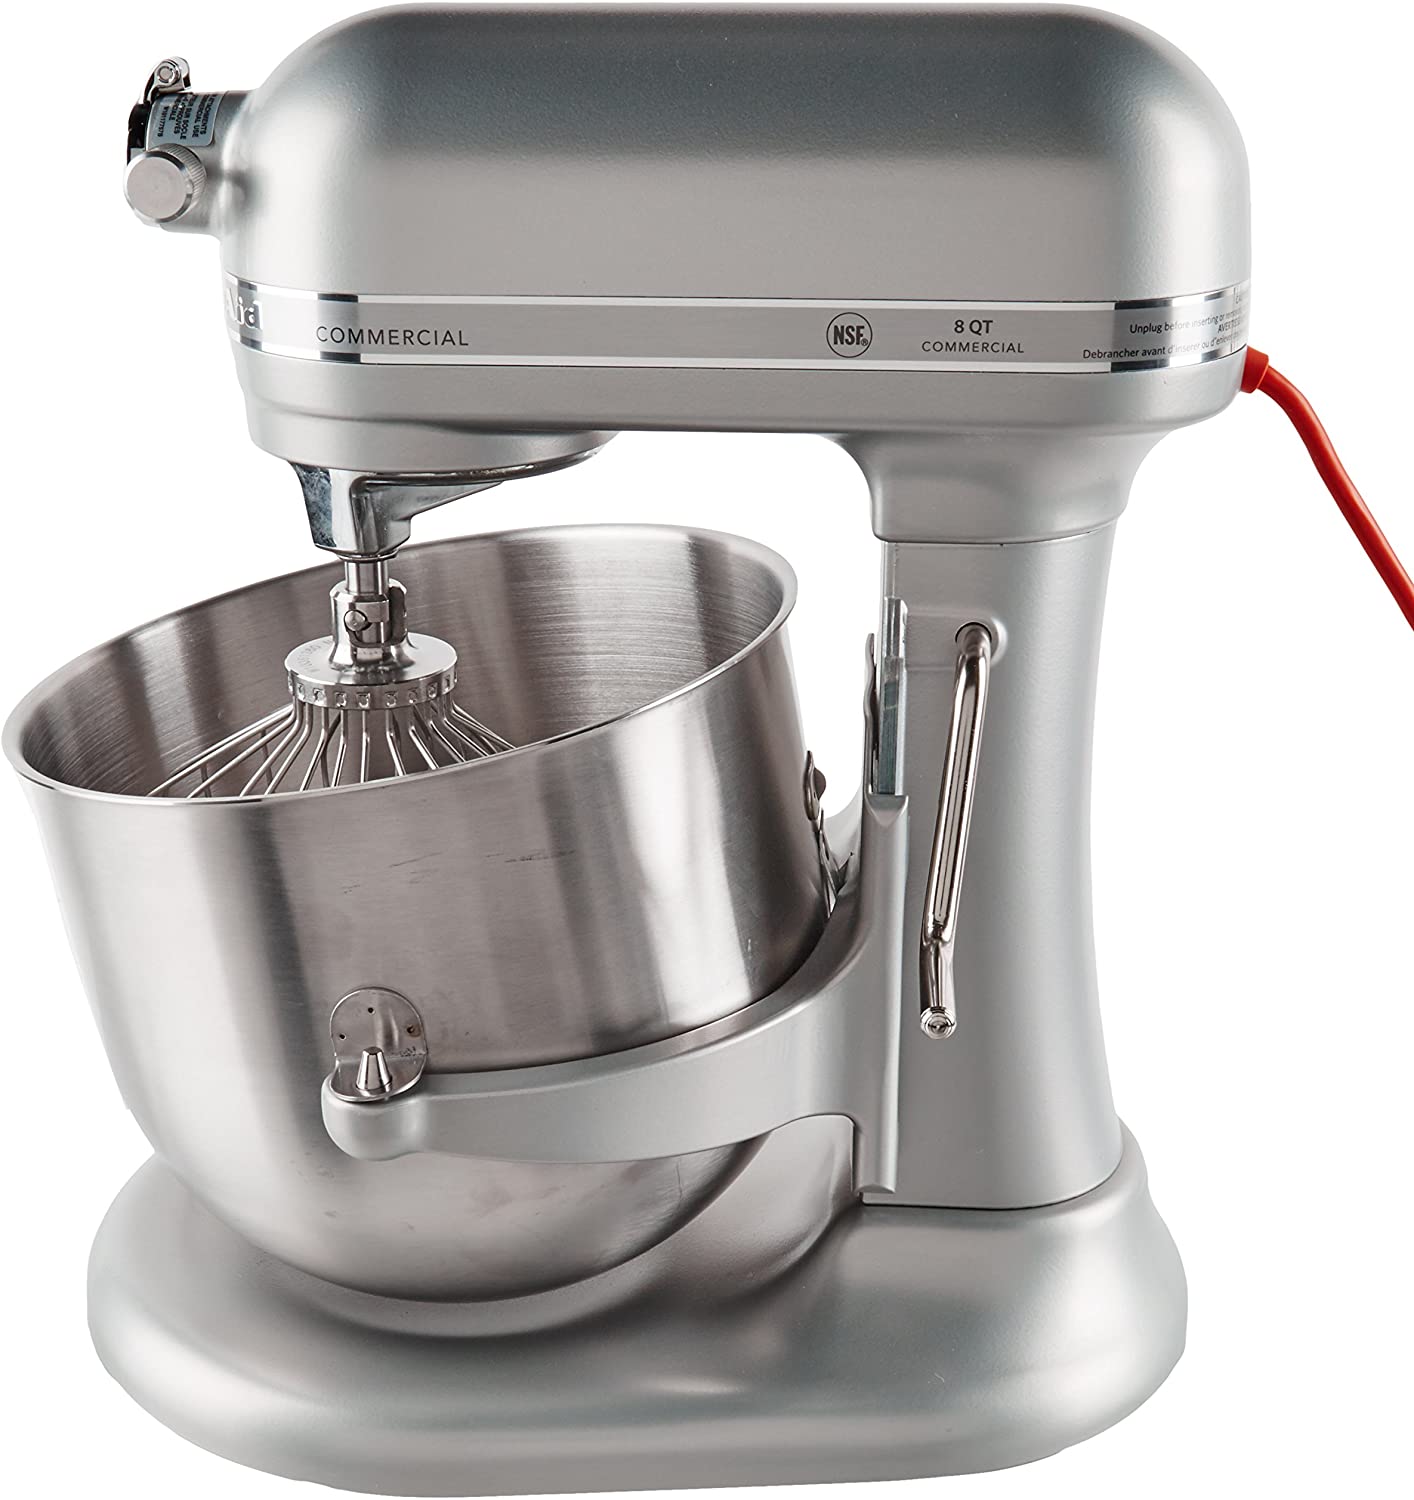 KitchenAid Commercial Series 8-Qt Bowl Lift Stand Mixer Nickel Pearl (KSM8990NP) - Plant Based Pros